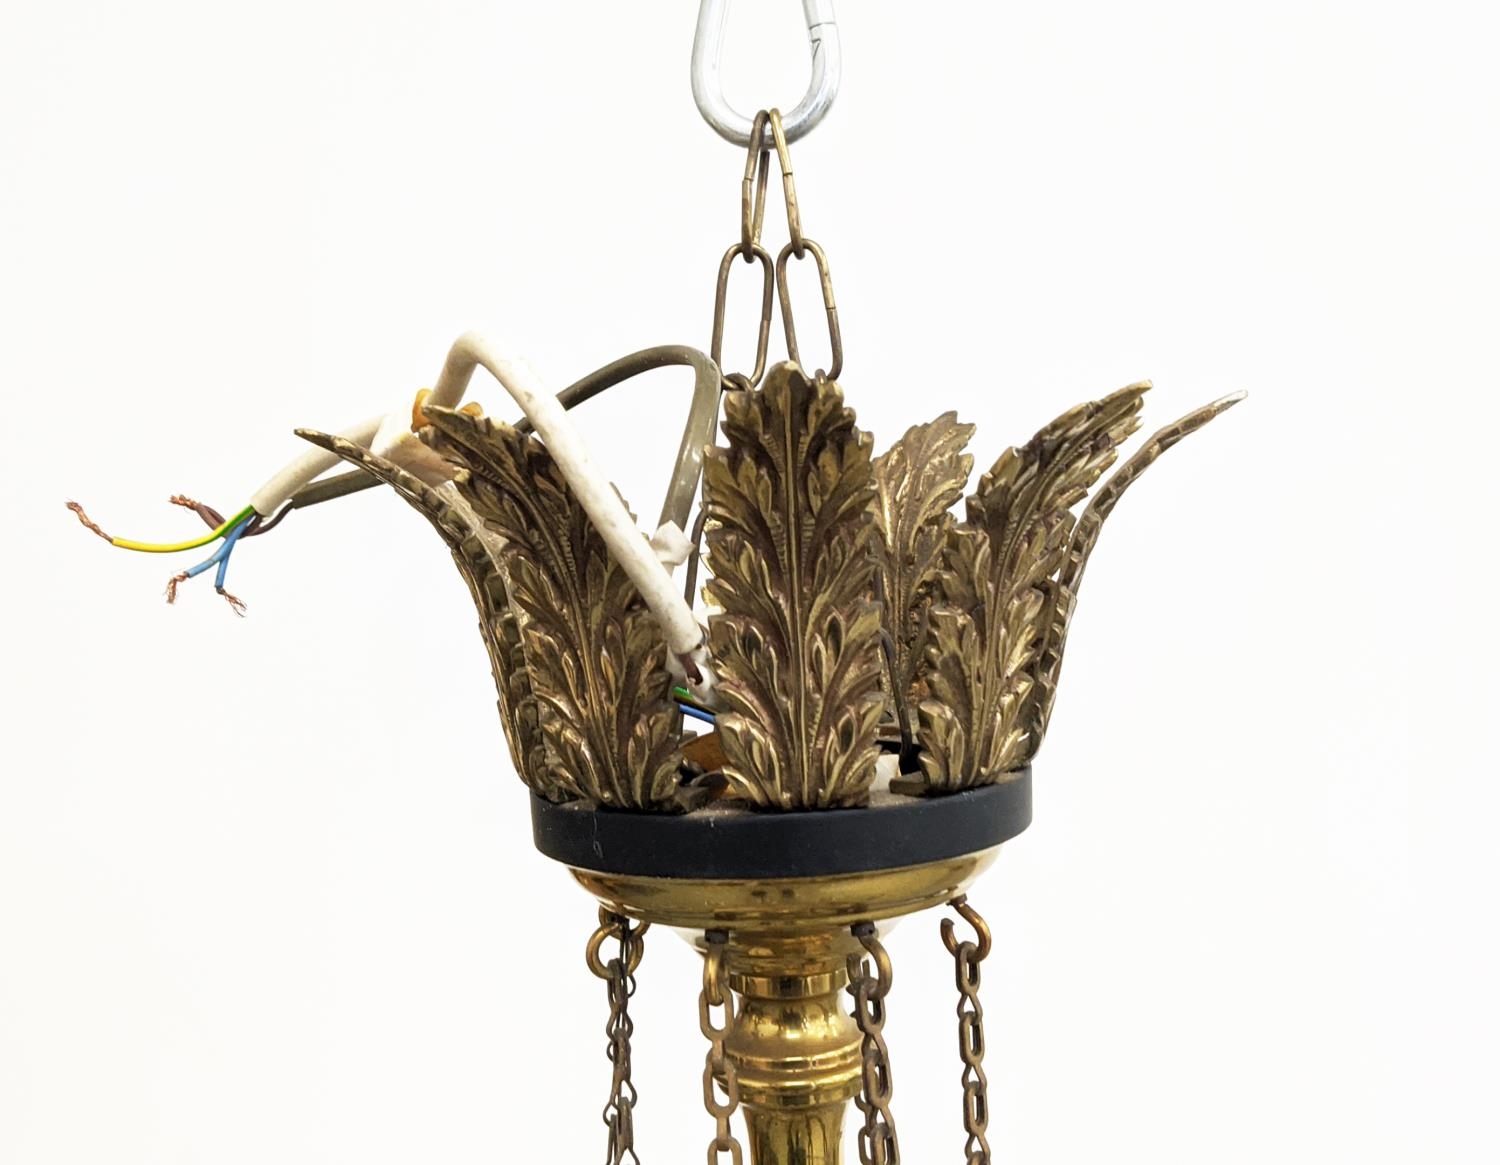 CEILING LIGHT EMPIRE STYLE, black metal and brass with acanthus leaf detail, 77cm W x 96cm H approx. - Image 5 of 14